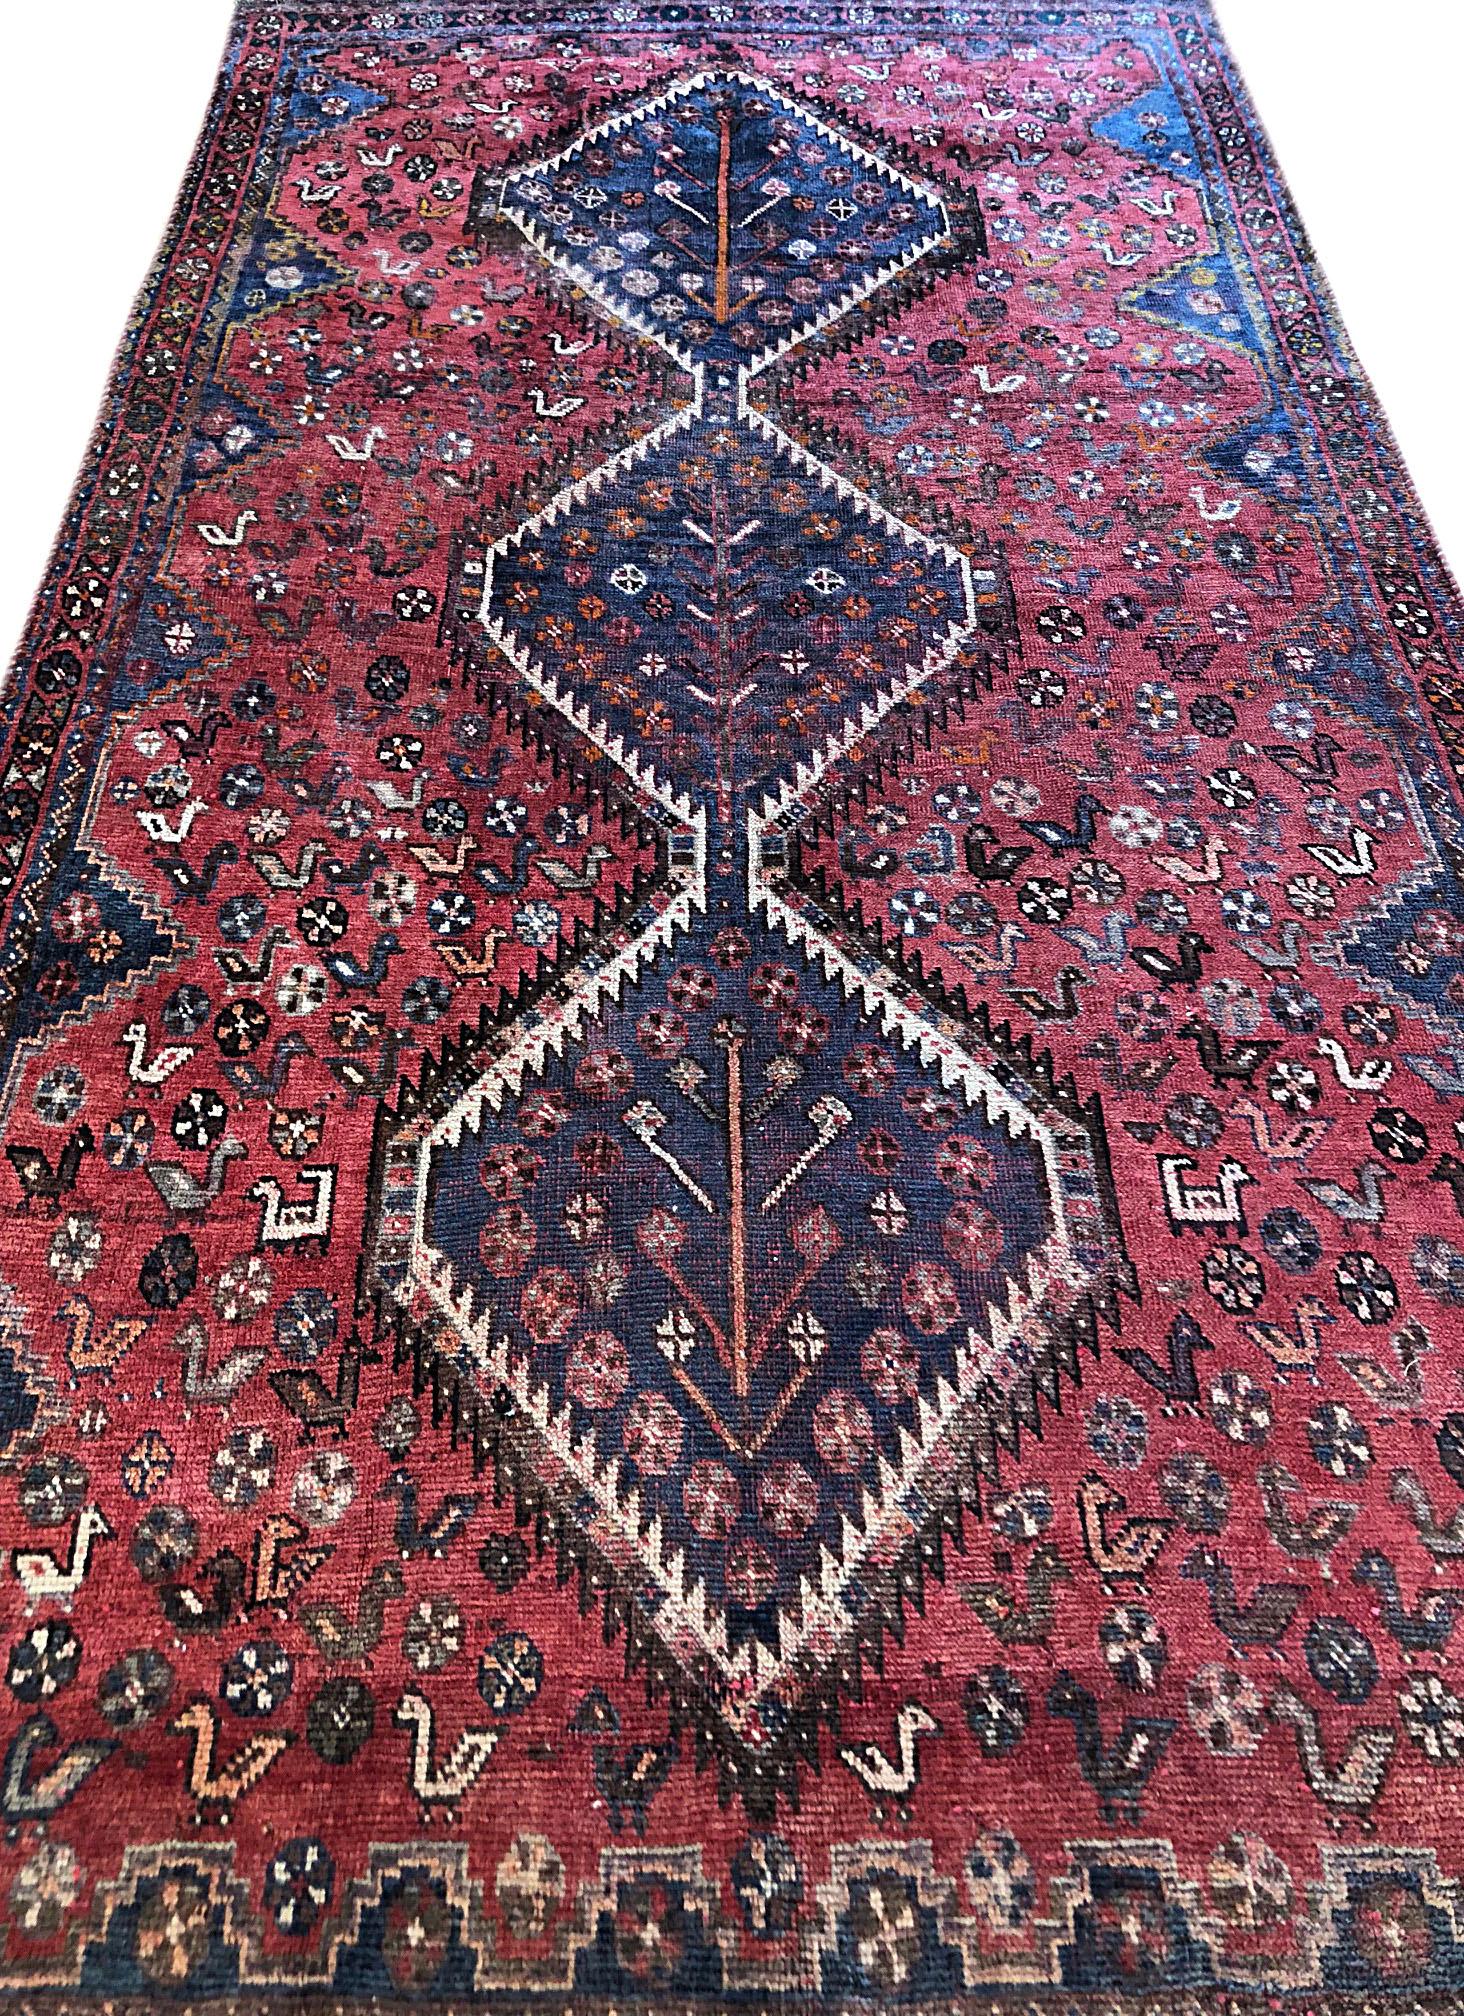 Tribal Persian Hand-Knotted Repeated Medallion Red Shiraz Bird Motif Rug